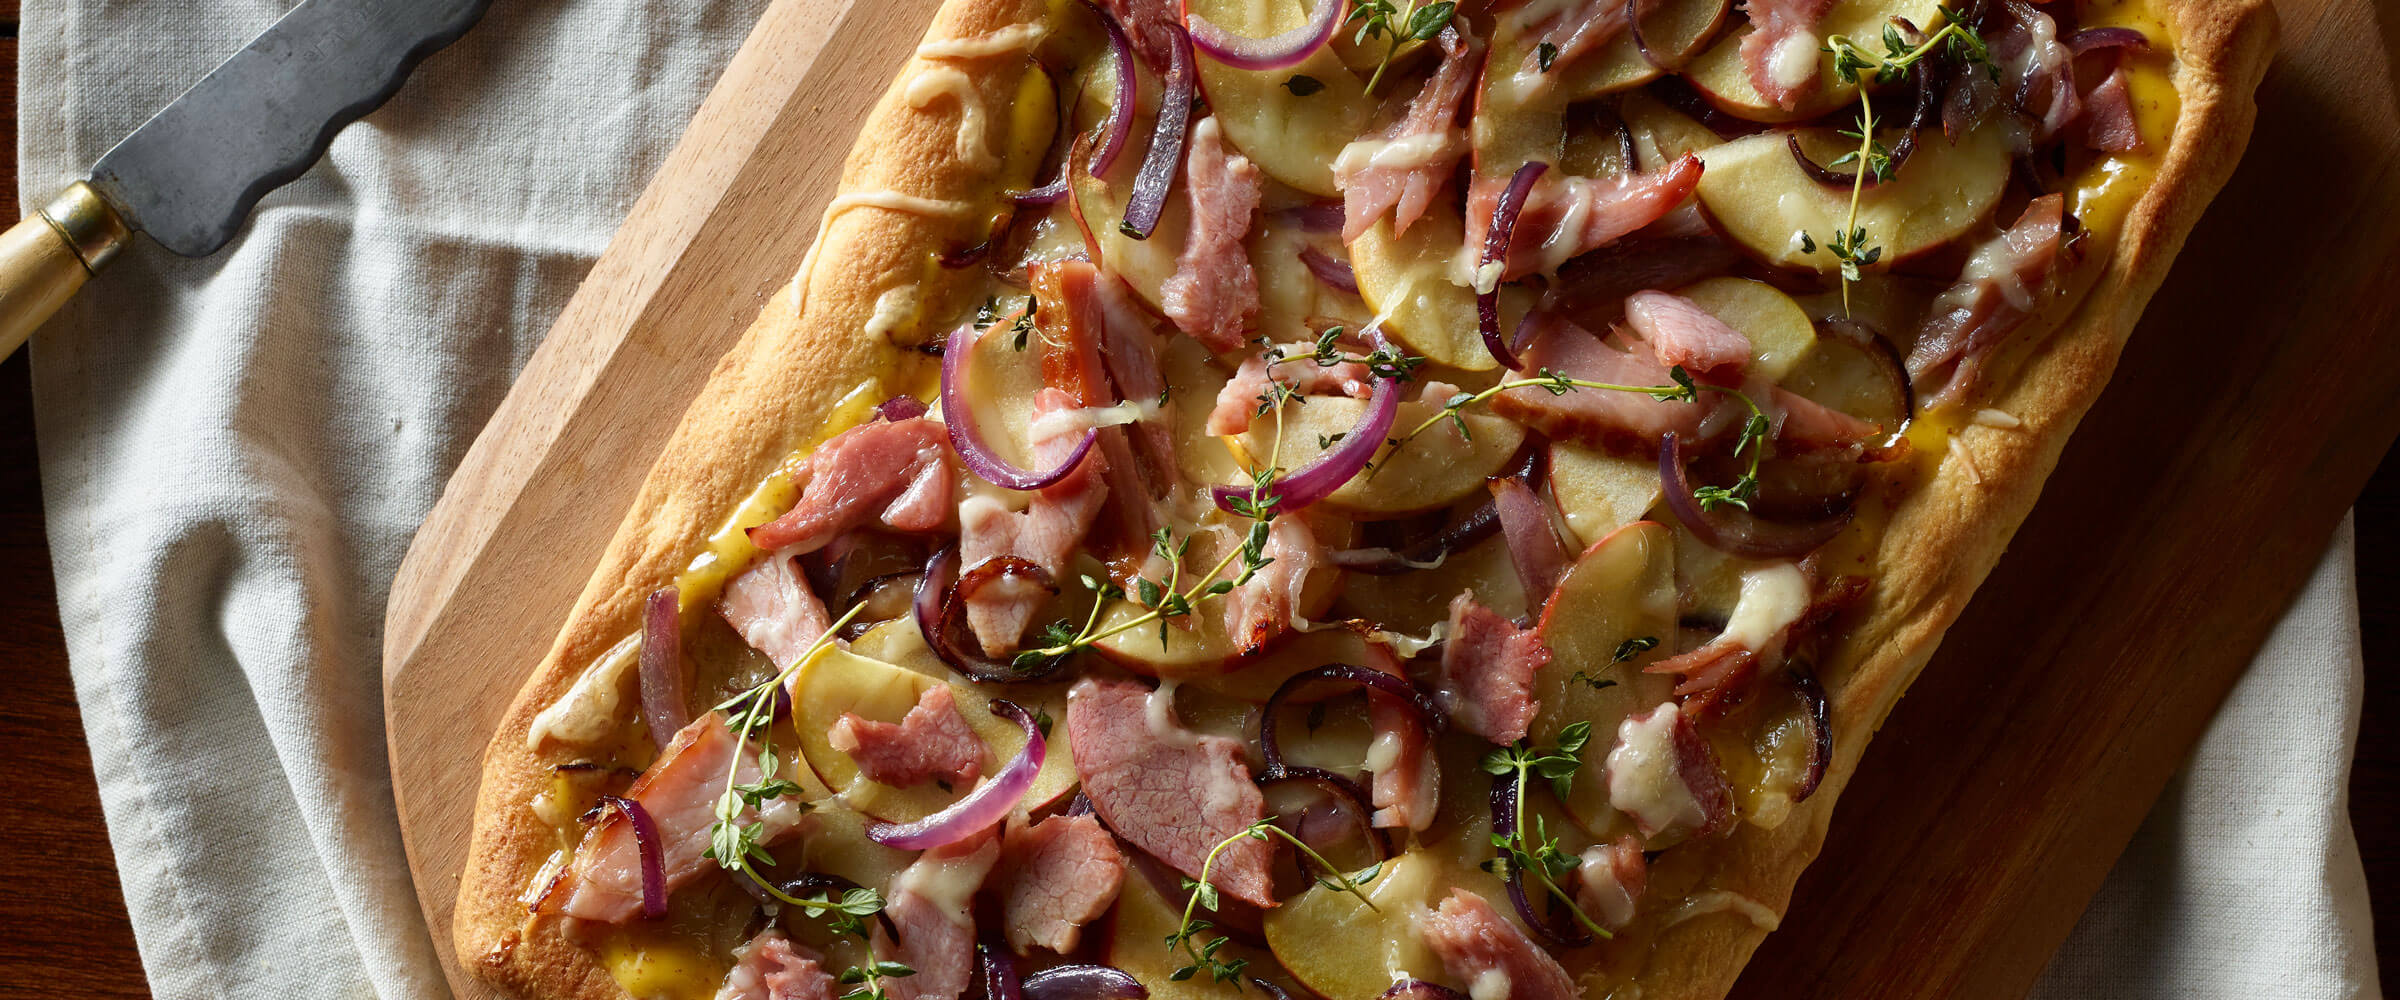 Ham and Apple Caramelized Onion Flatbread on wood cutting board with linen